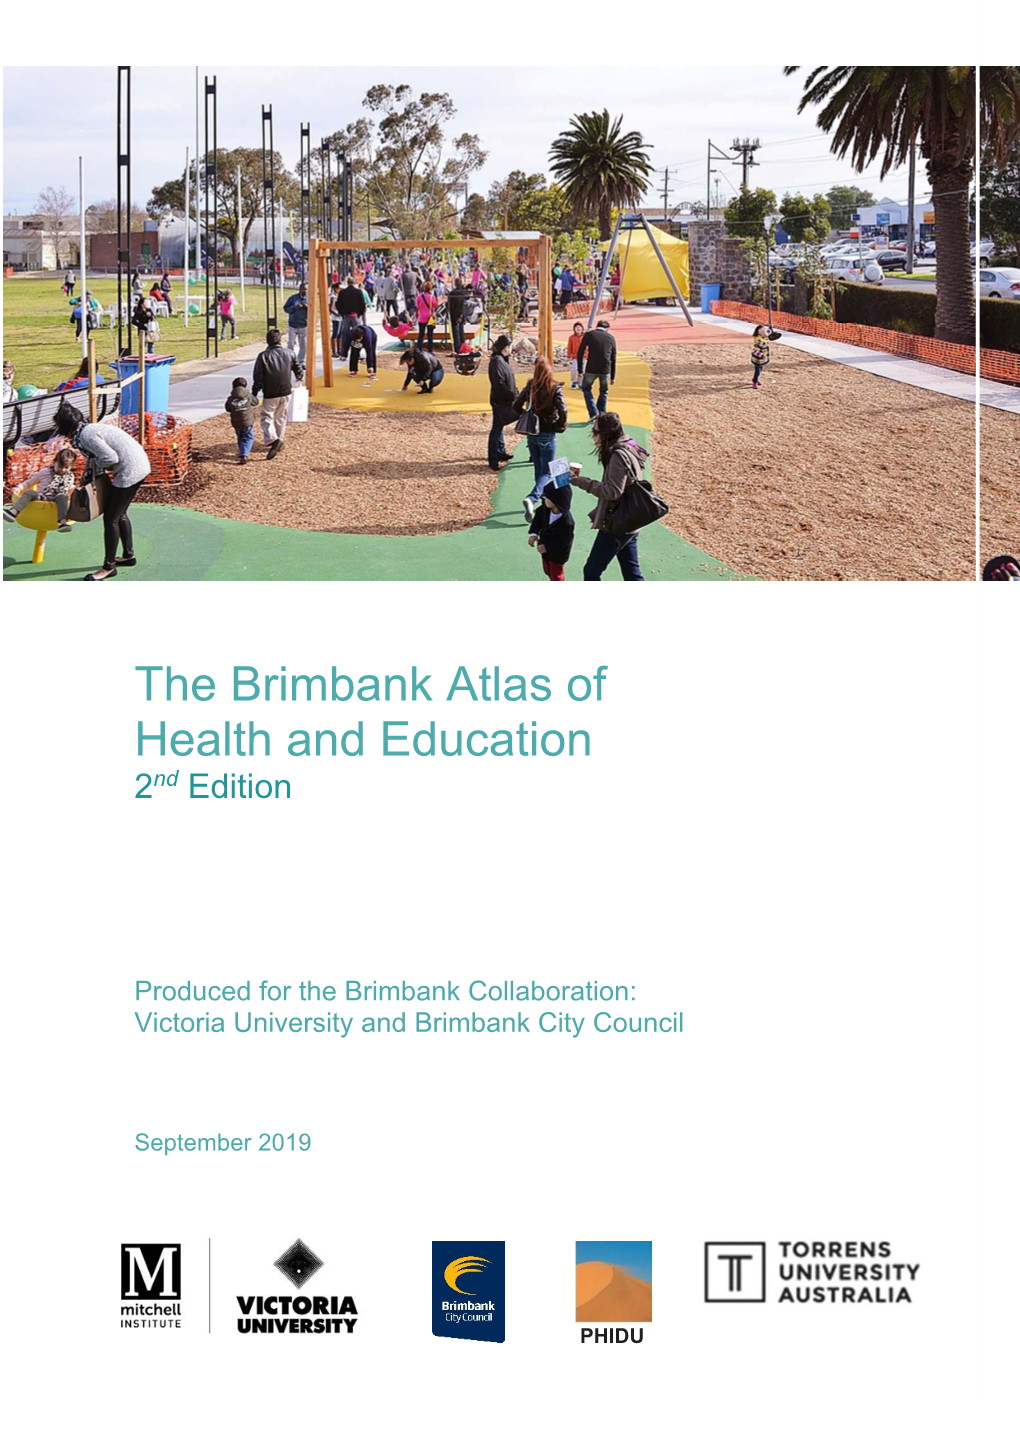 The Brimbank Atlas of Health and Education 2Nd Edition